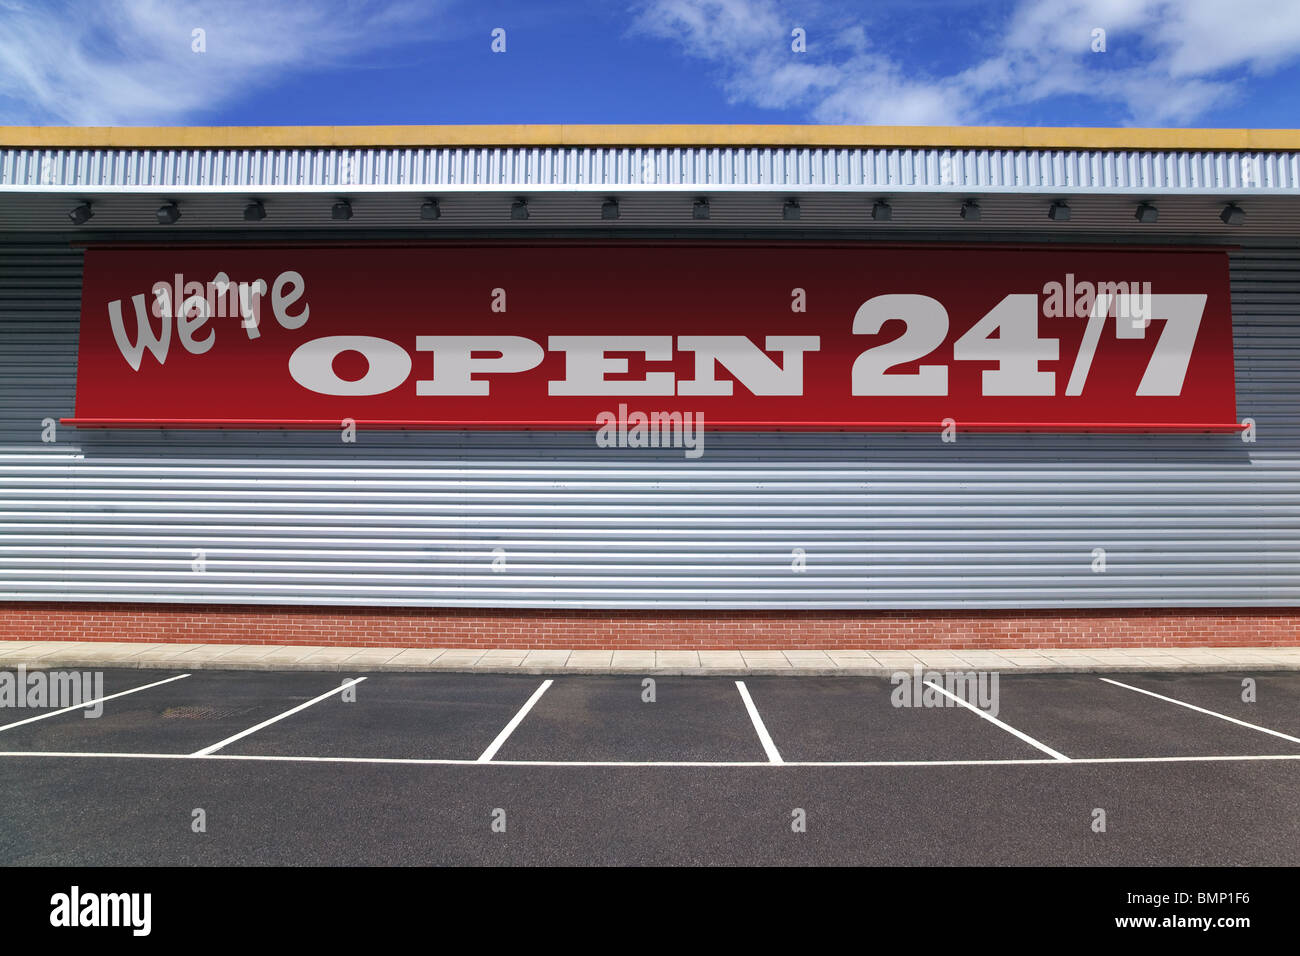 Billboard on a retail building with notice saying We're open 24/7 Stock Photo